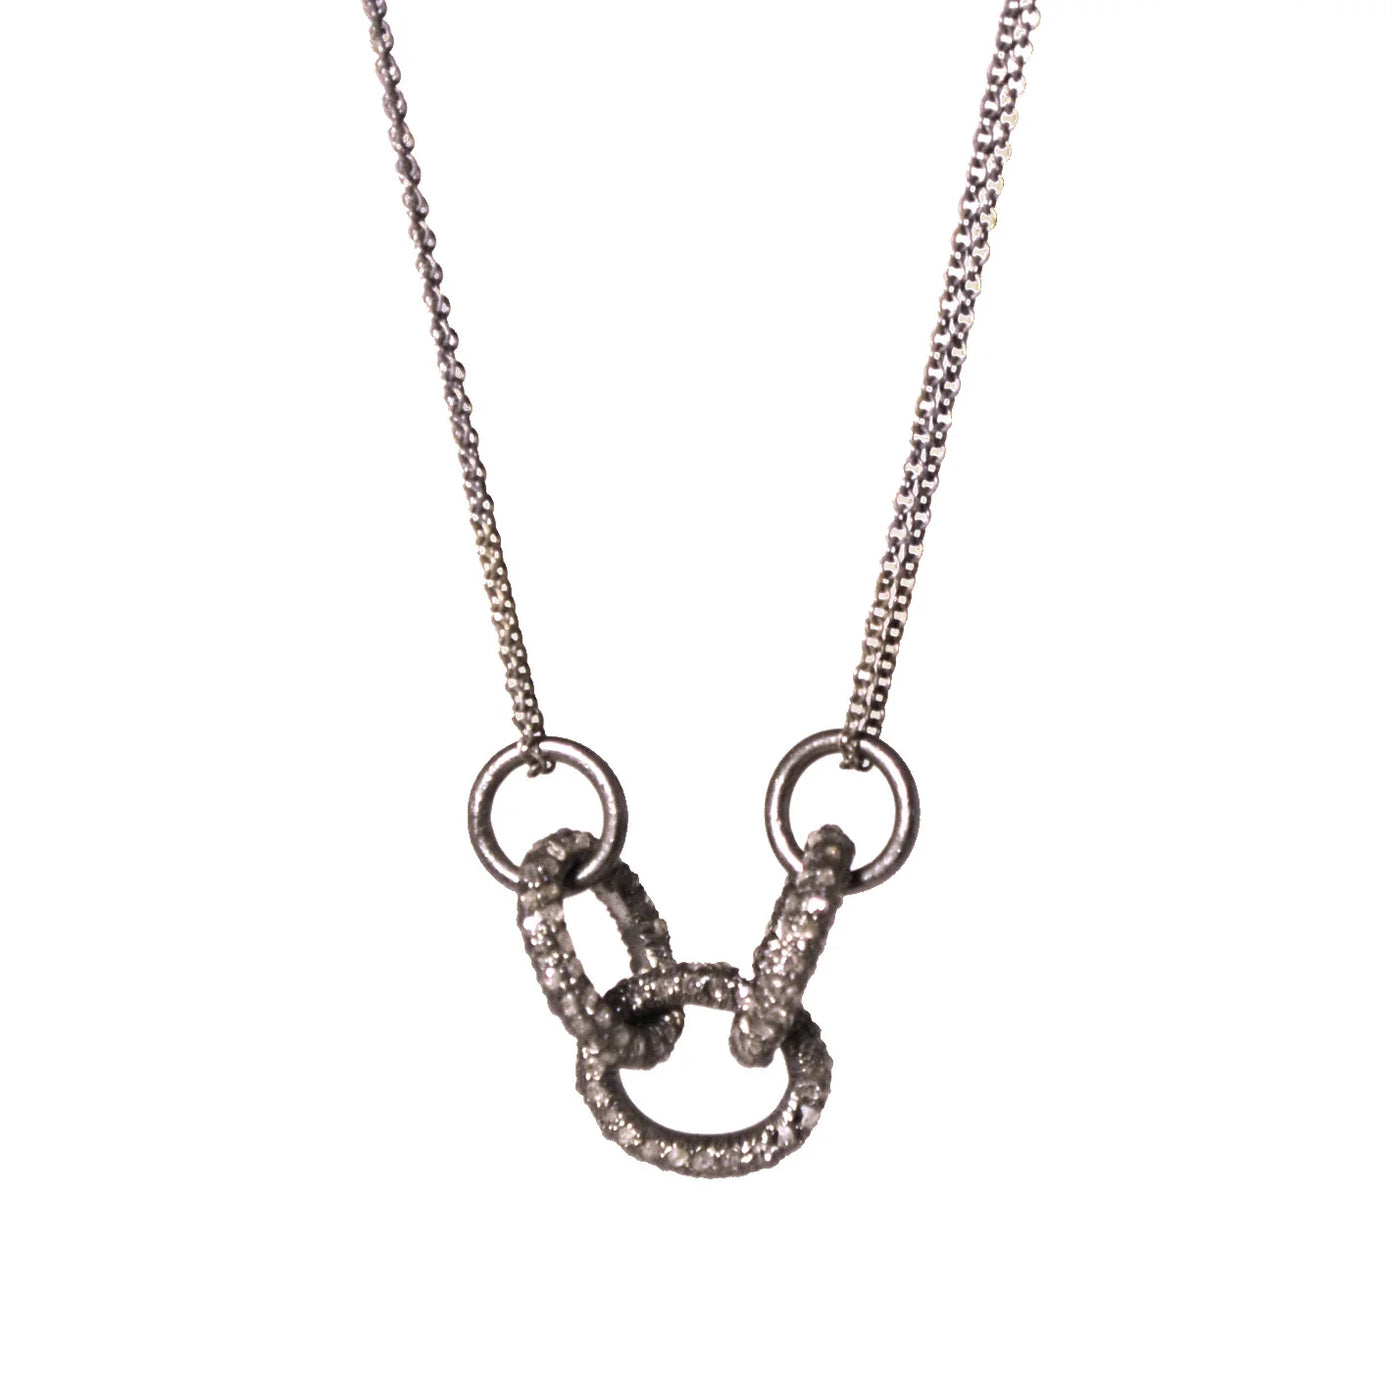 MABEL CHONG NECKLACE PAVE DIAMOND LINK